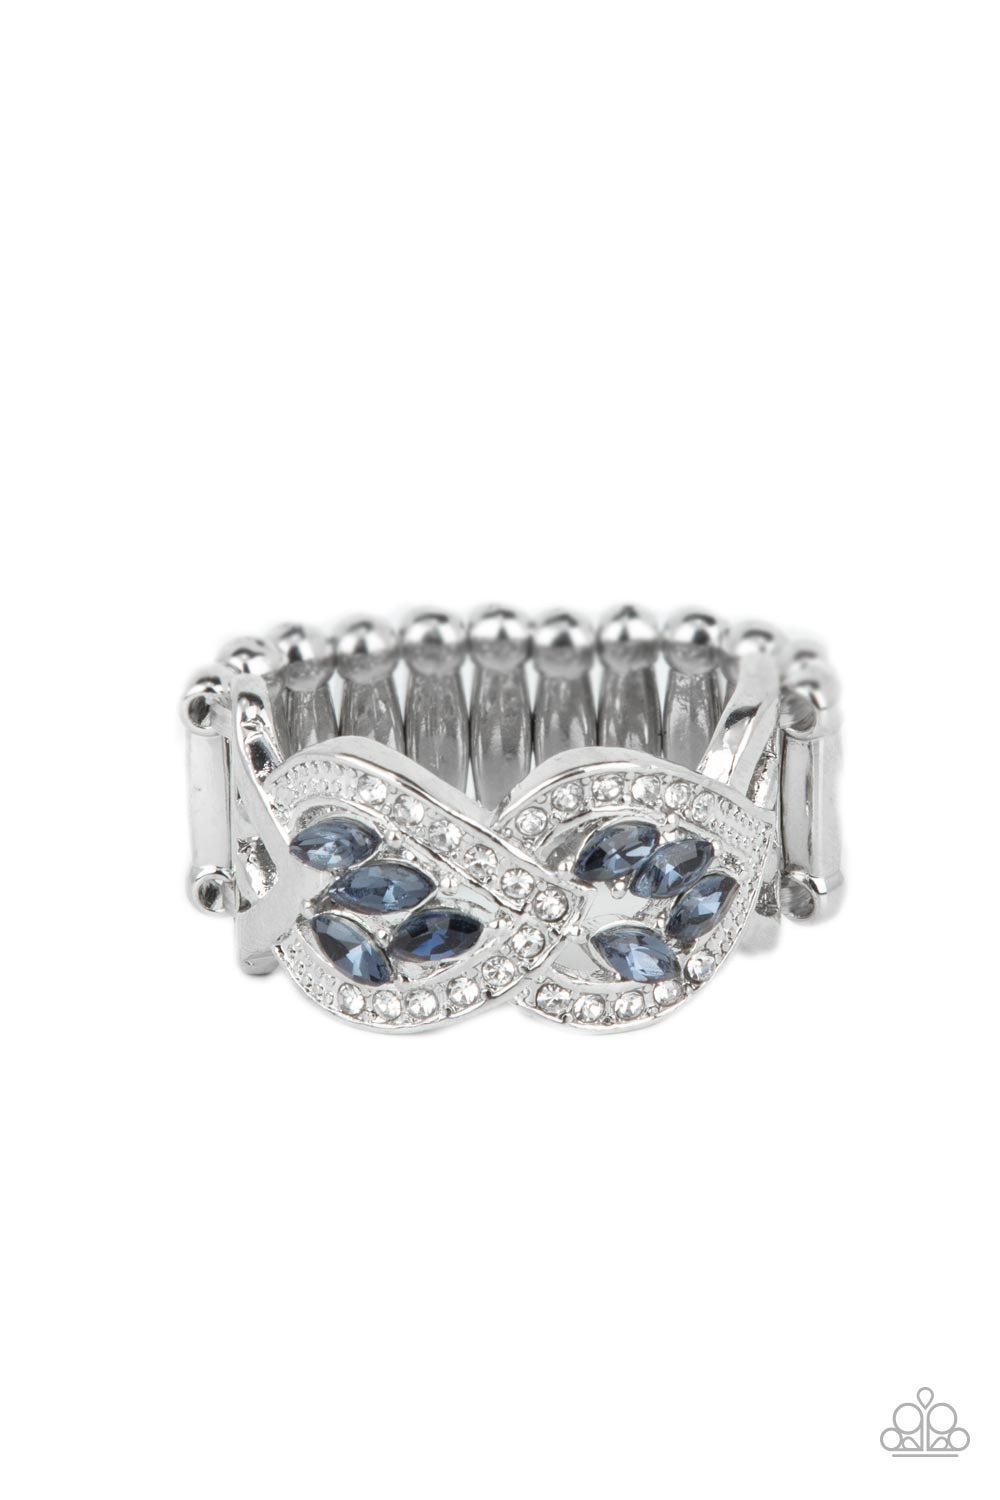 Engagement Party Posh Blue Rhinestone Ring - Paparazzi Accessories- lightbox - CarasShop.com - $5 Jewelry by Cara Jewels